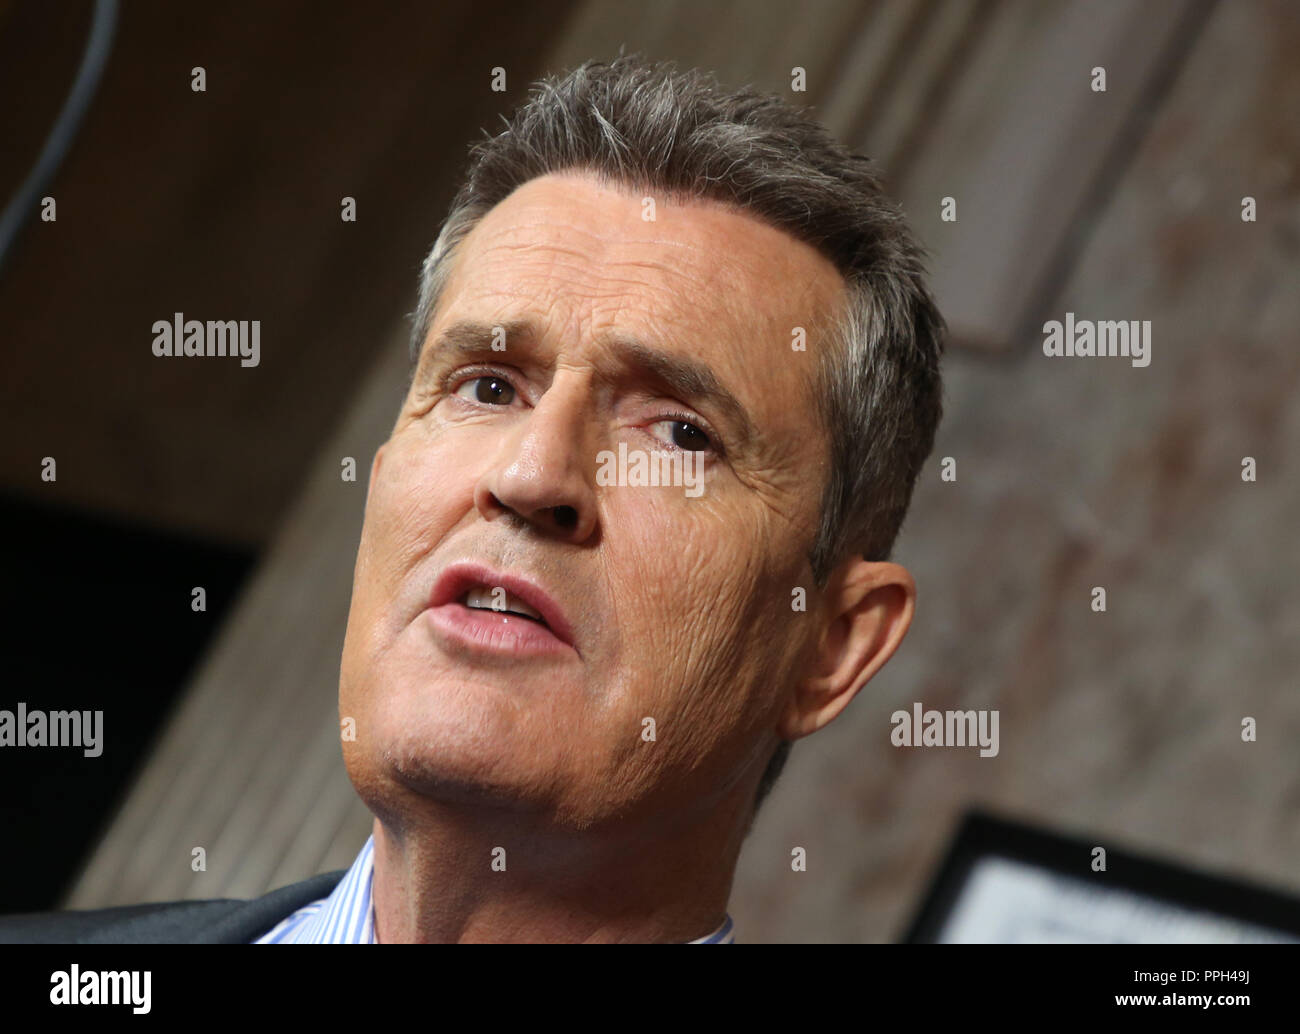 Beverly Hills, California, USA. 25th Sep, 2018. Rupert Everett, at 2018 LA Film Festival - Gala Screening Of 'The Happy Prince' at Wallis Annenberg Center for the Performing Arts in Beverly Hills California on September 25, 2018. Credit: Faye Sadou/Media Punch/Alamy Live News Stock Photo